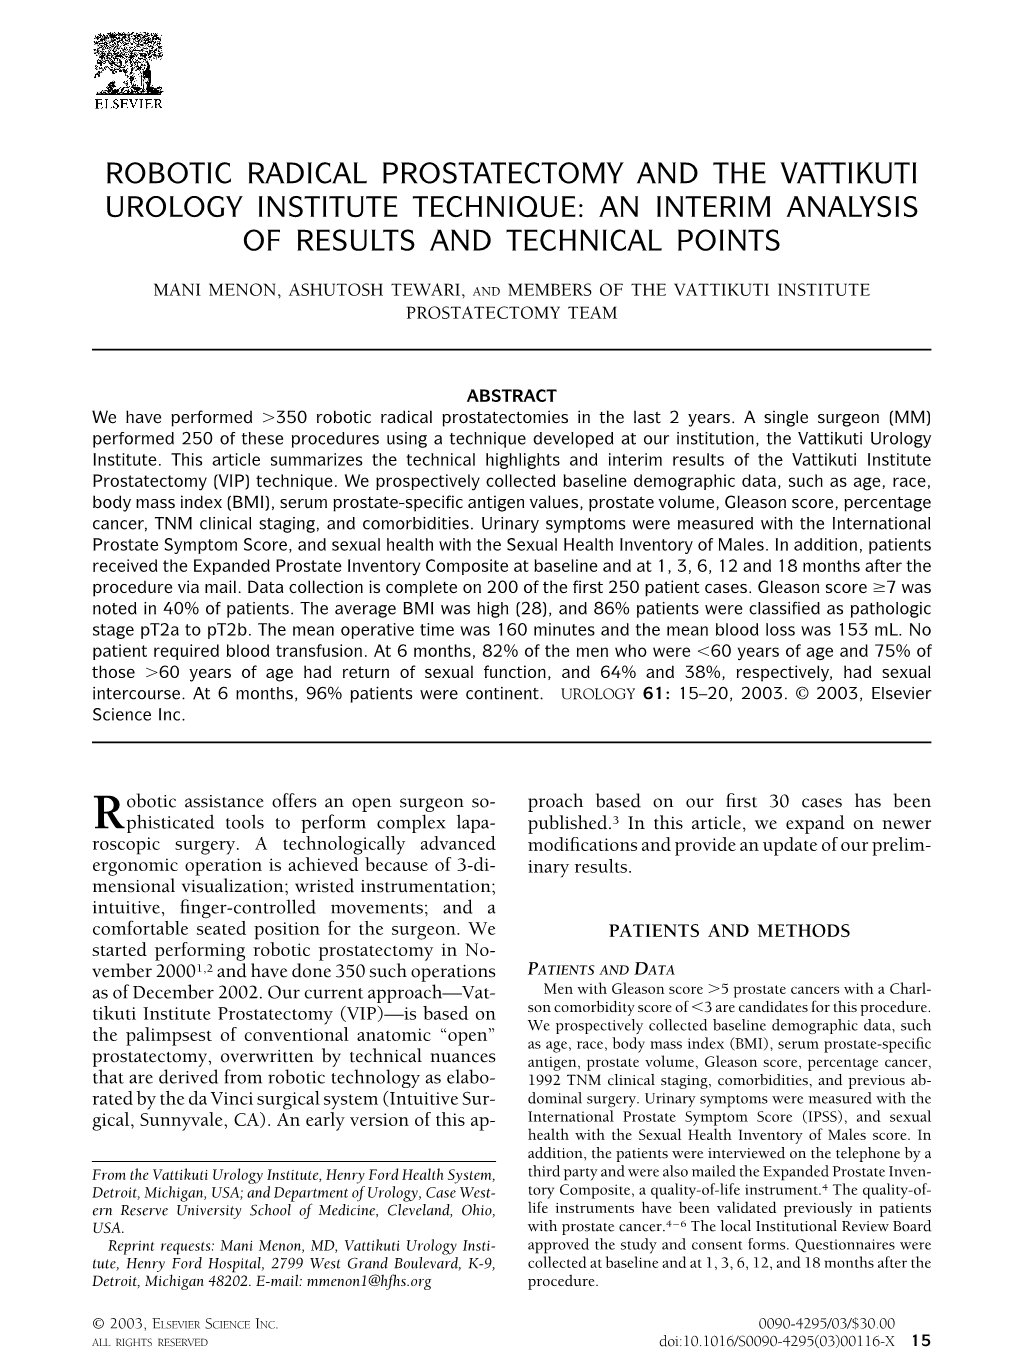 Robotic Radical Prostatectomy and the Vattikuti Urology Institute Technique: an Interim Analysis of Results and Technical Points